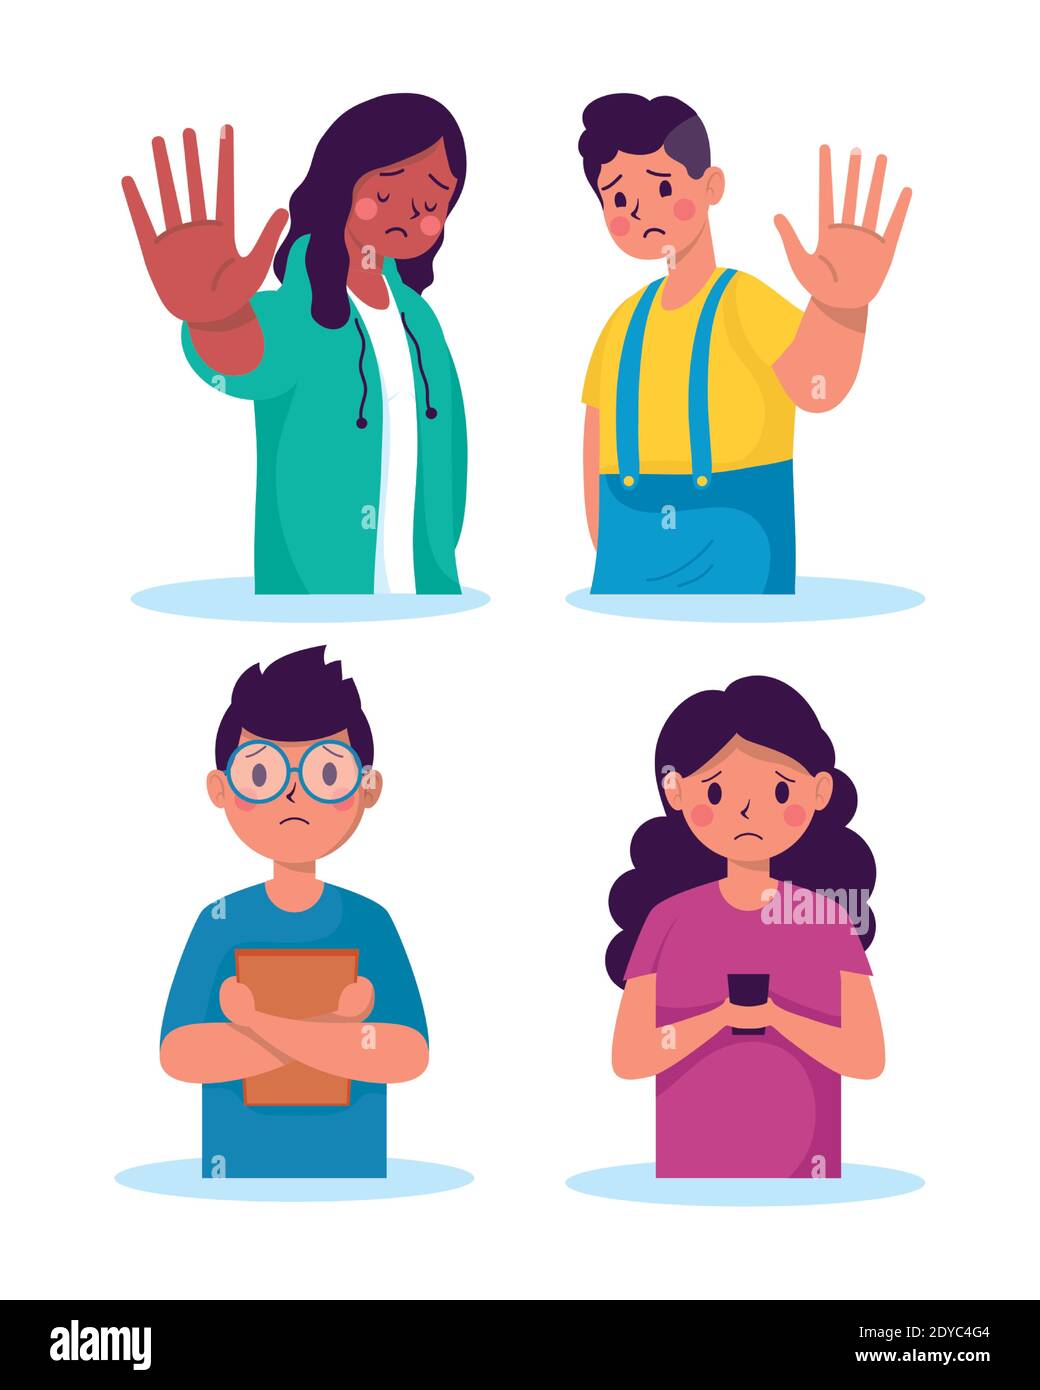 young people victims of bullying characters vector illustration design Stock Vector